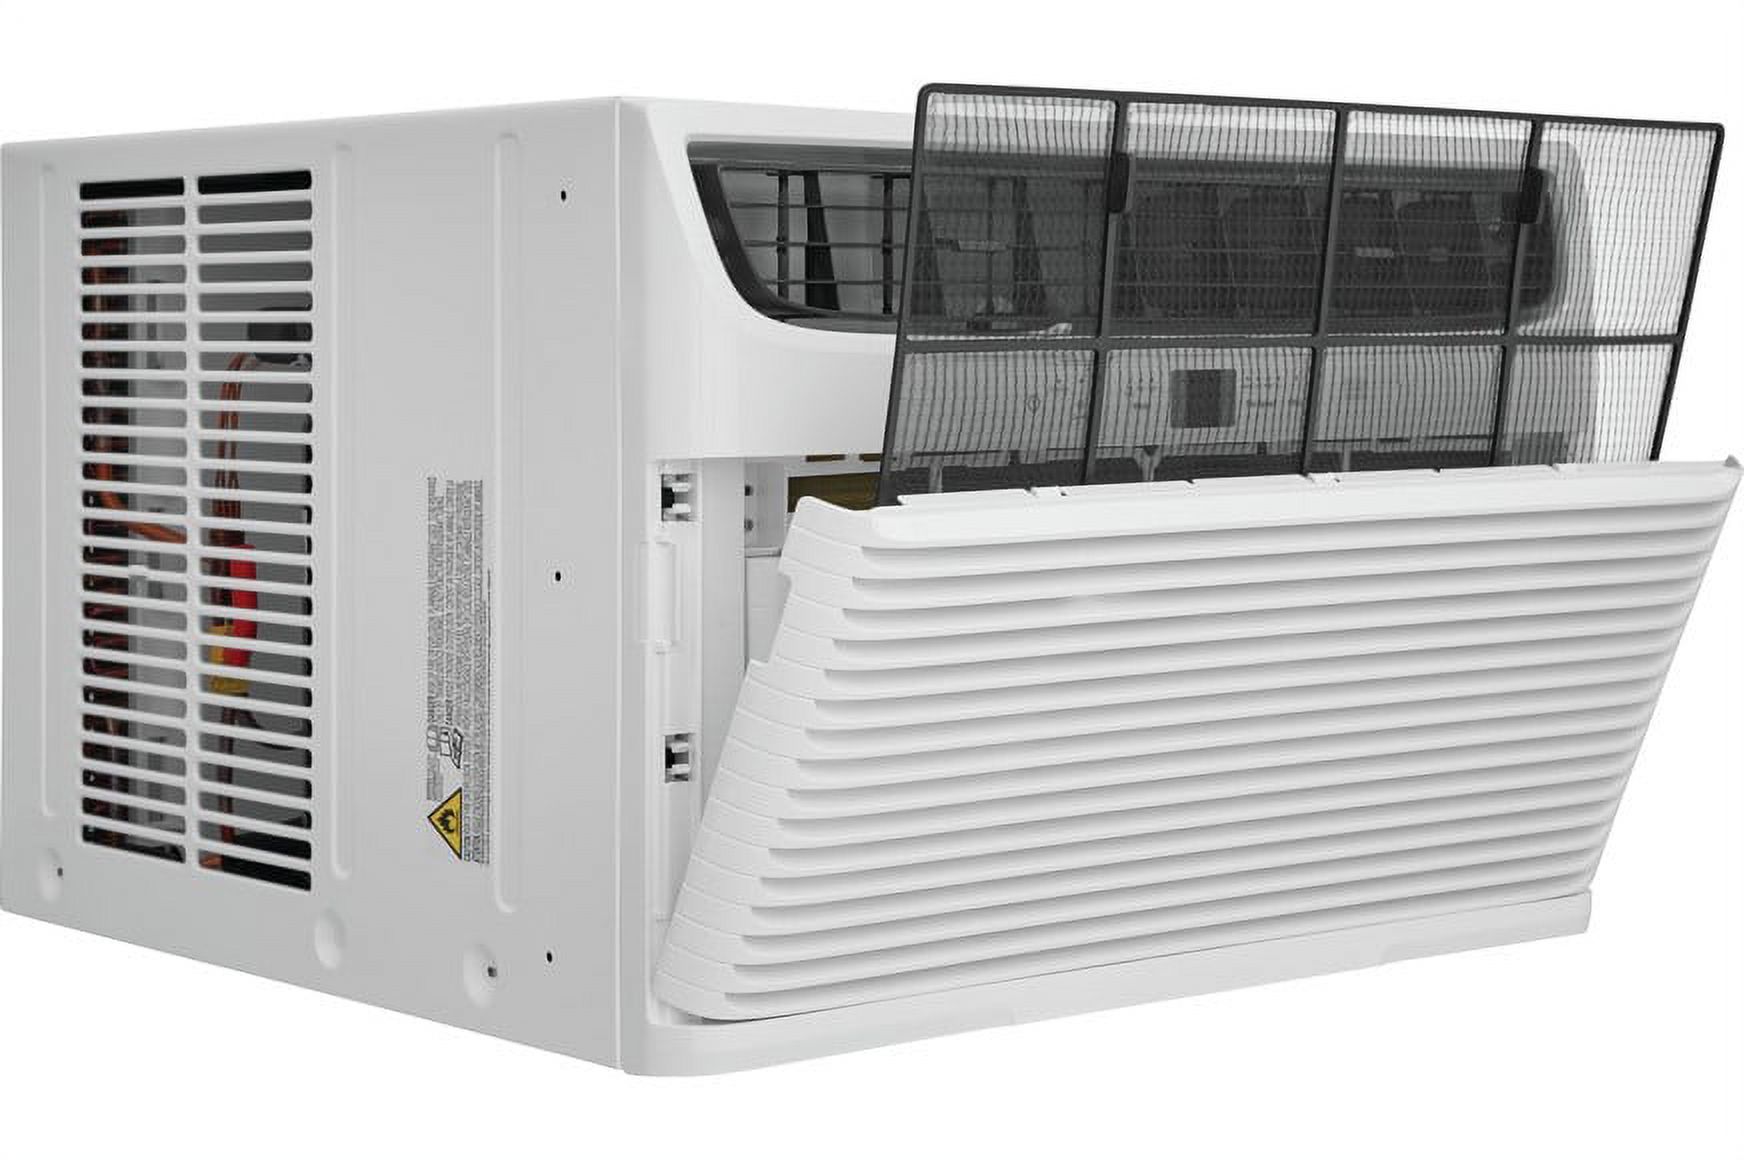 Frigidaire 25,000 BTU 230-Volt Window Air Conditioner with Slide-Out Chassis, Energy Star, FHWC253WB2 - image 5 of 5